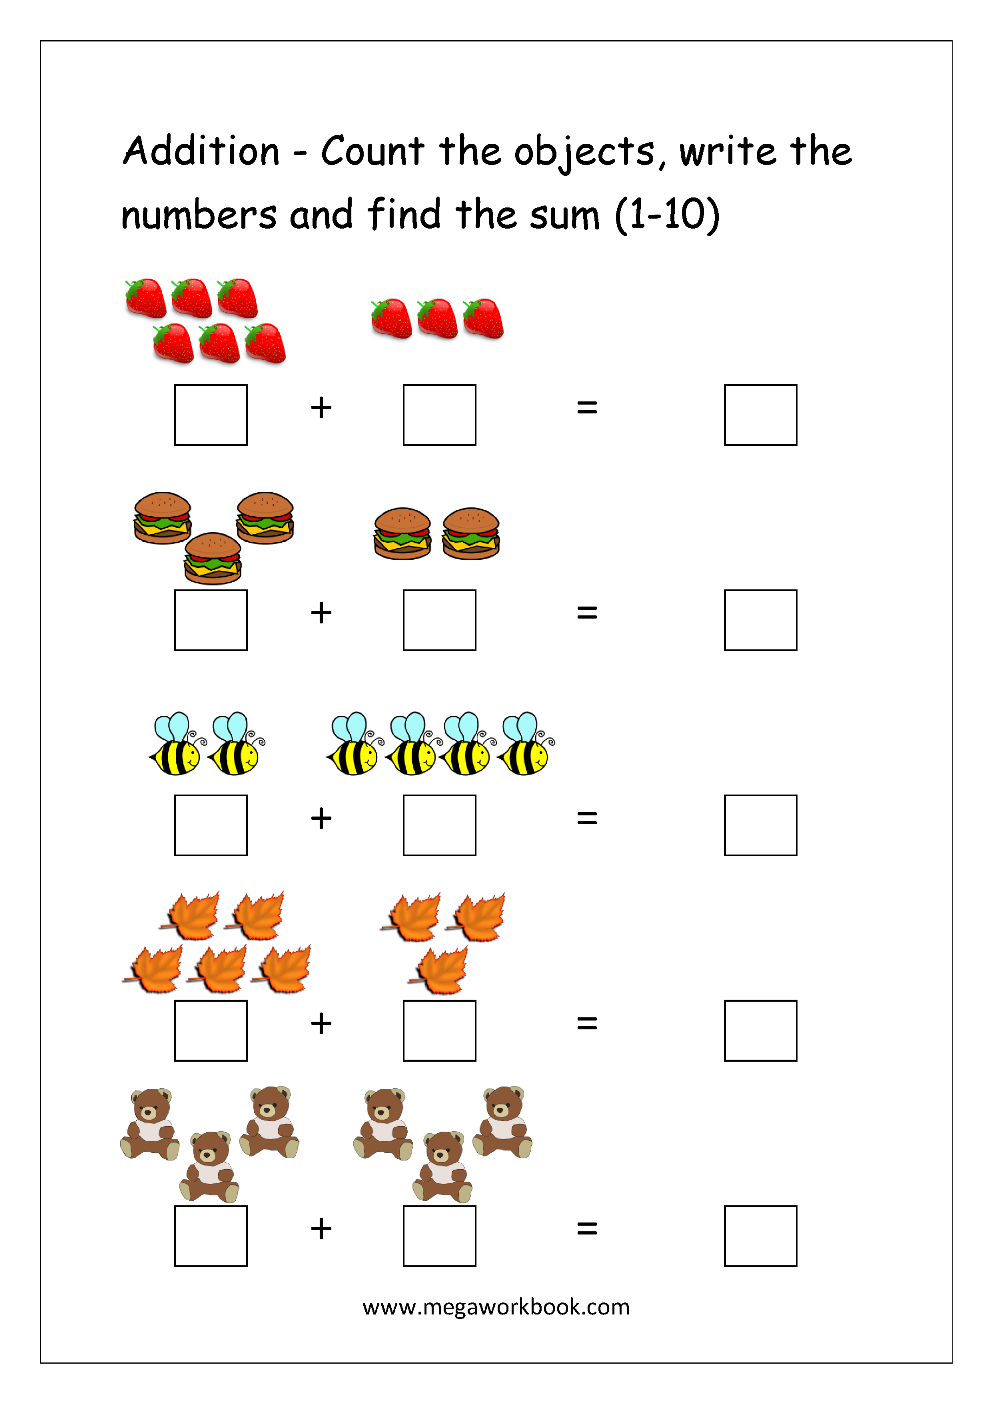 Free Printable Number Addition Worksheets 110 For Kindergarten As Well As Picture Addition Worksheets